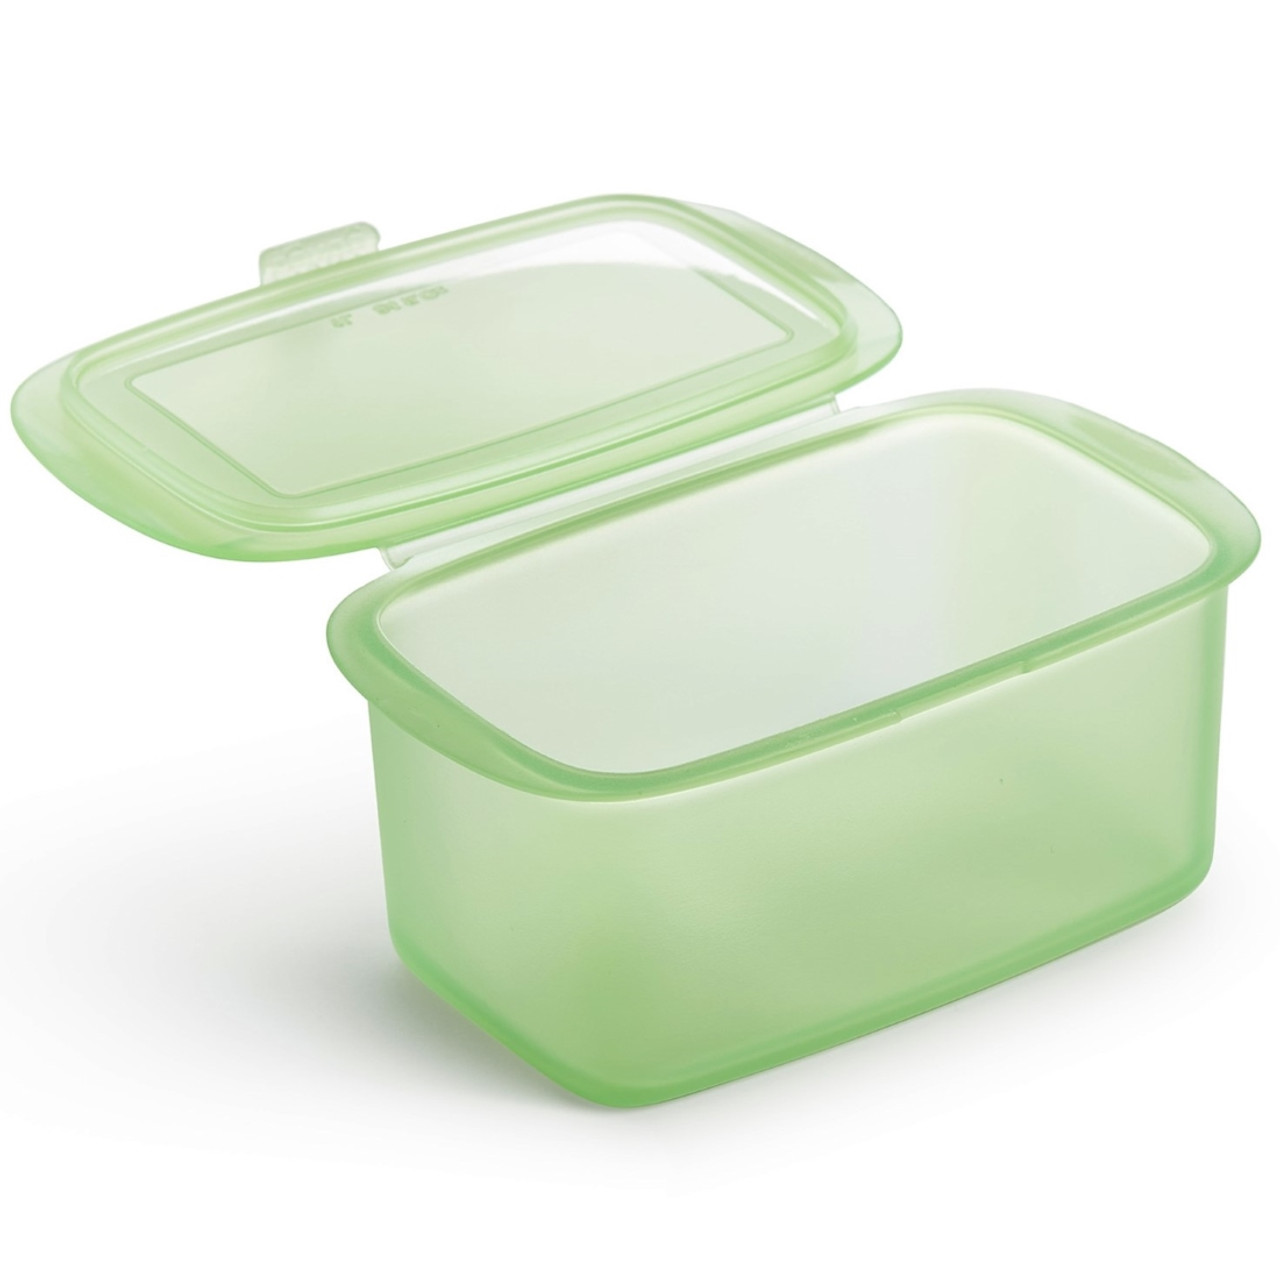 WHOLE HOUSEWARES, Glass Food Storage Containers Meal Prep, 3 Sizes